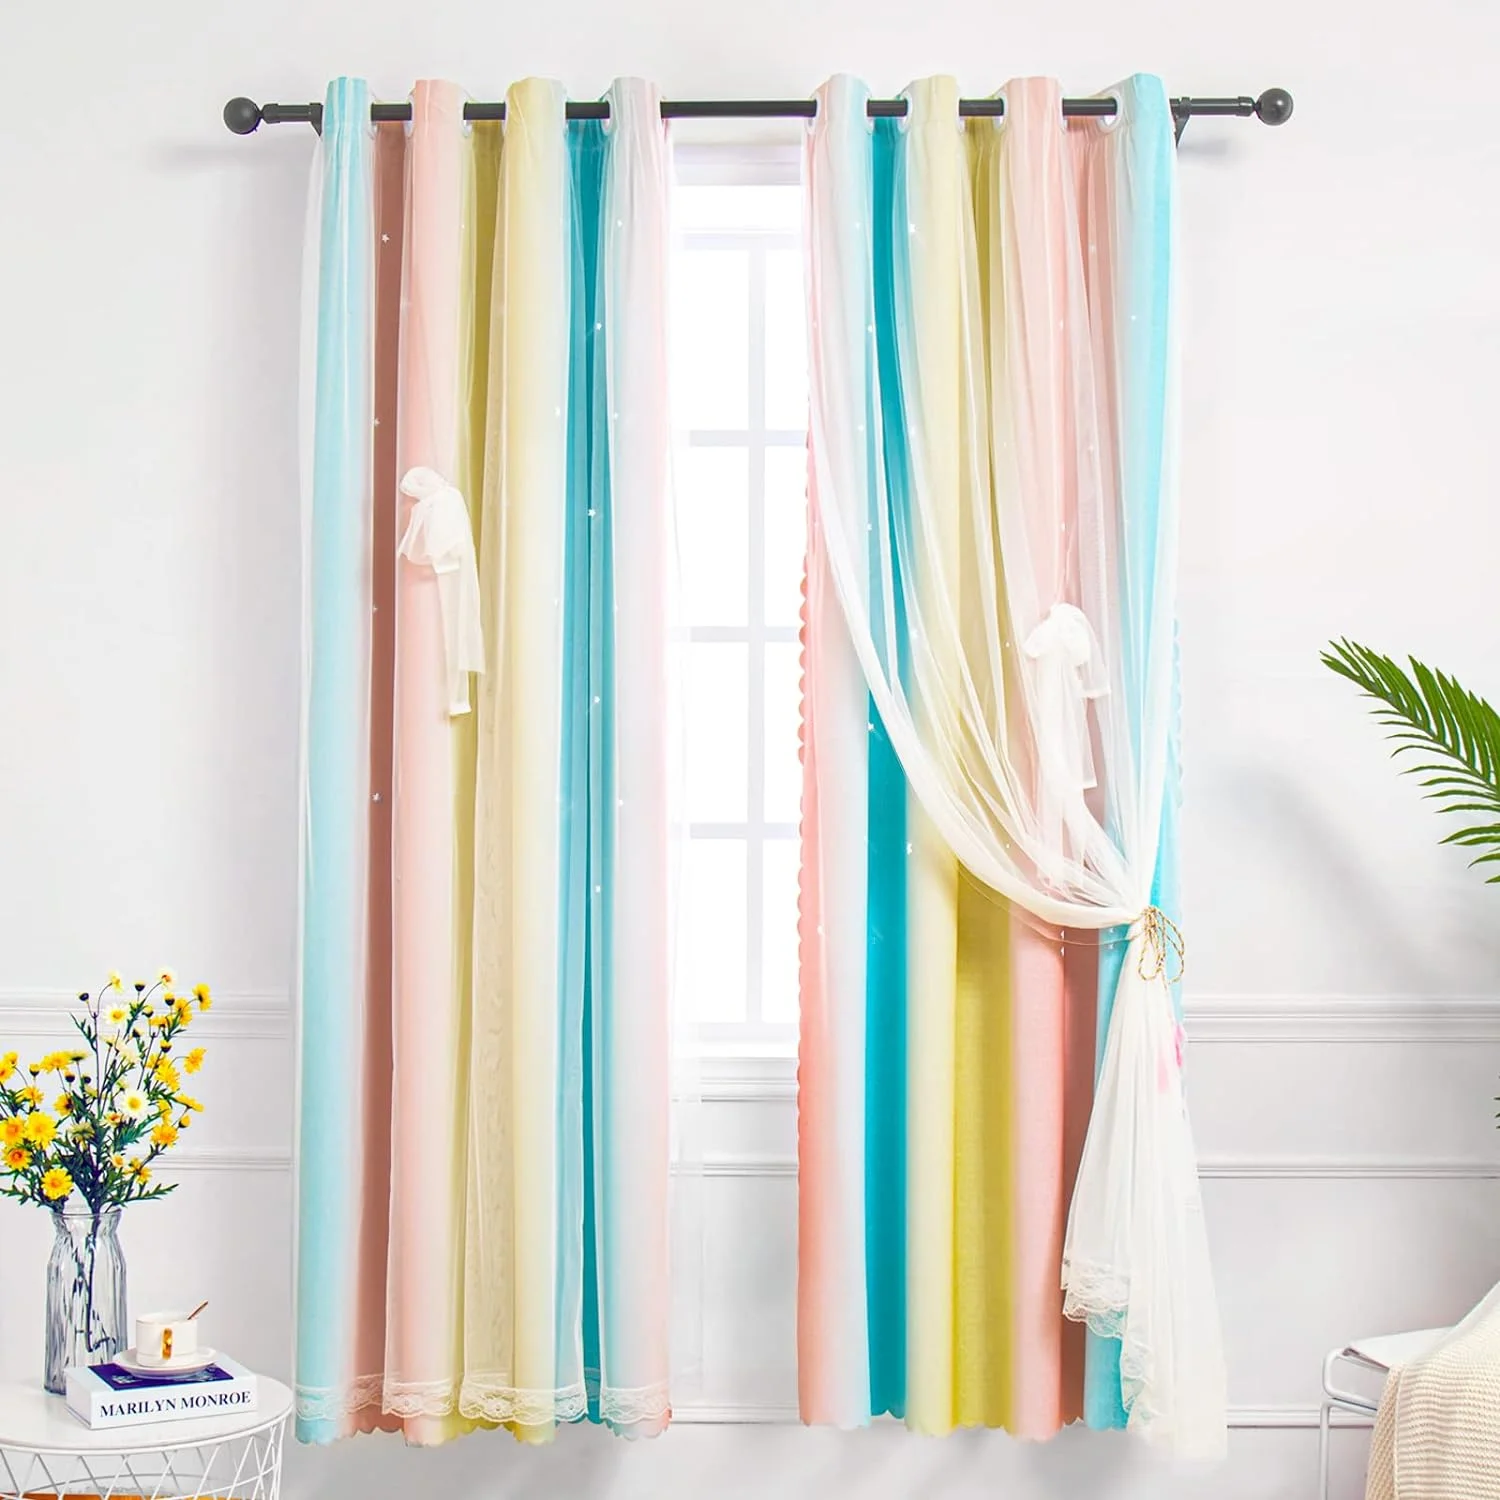 Light-filtering curtains in a soft pastel shade